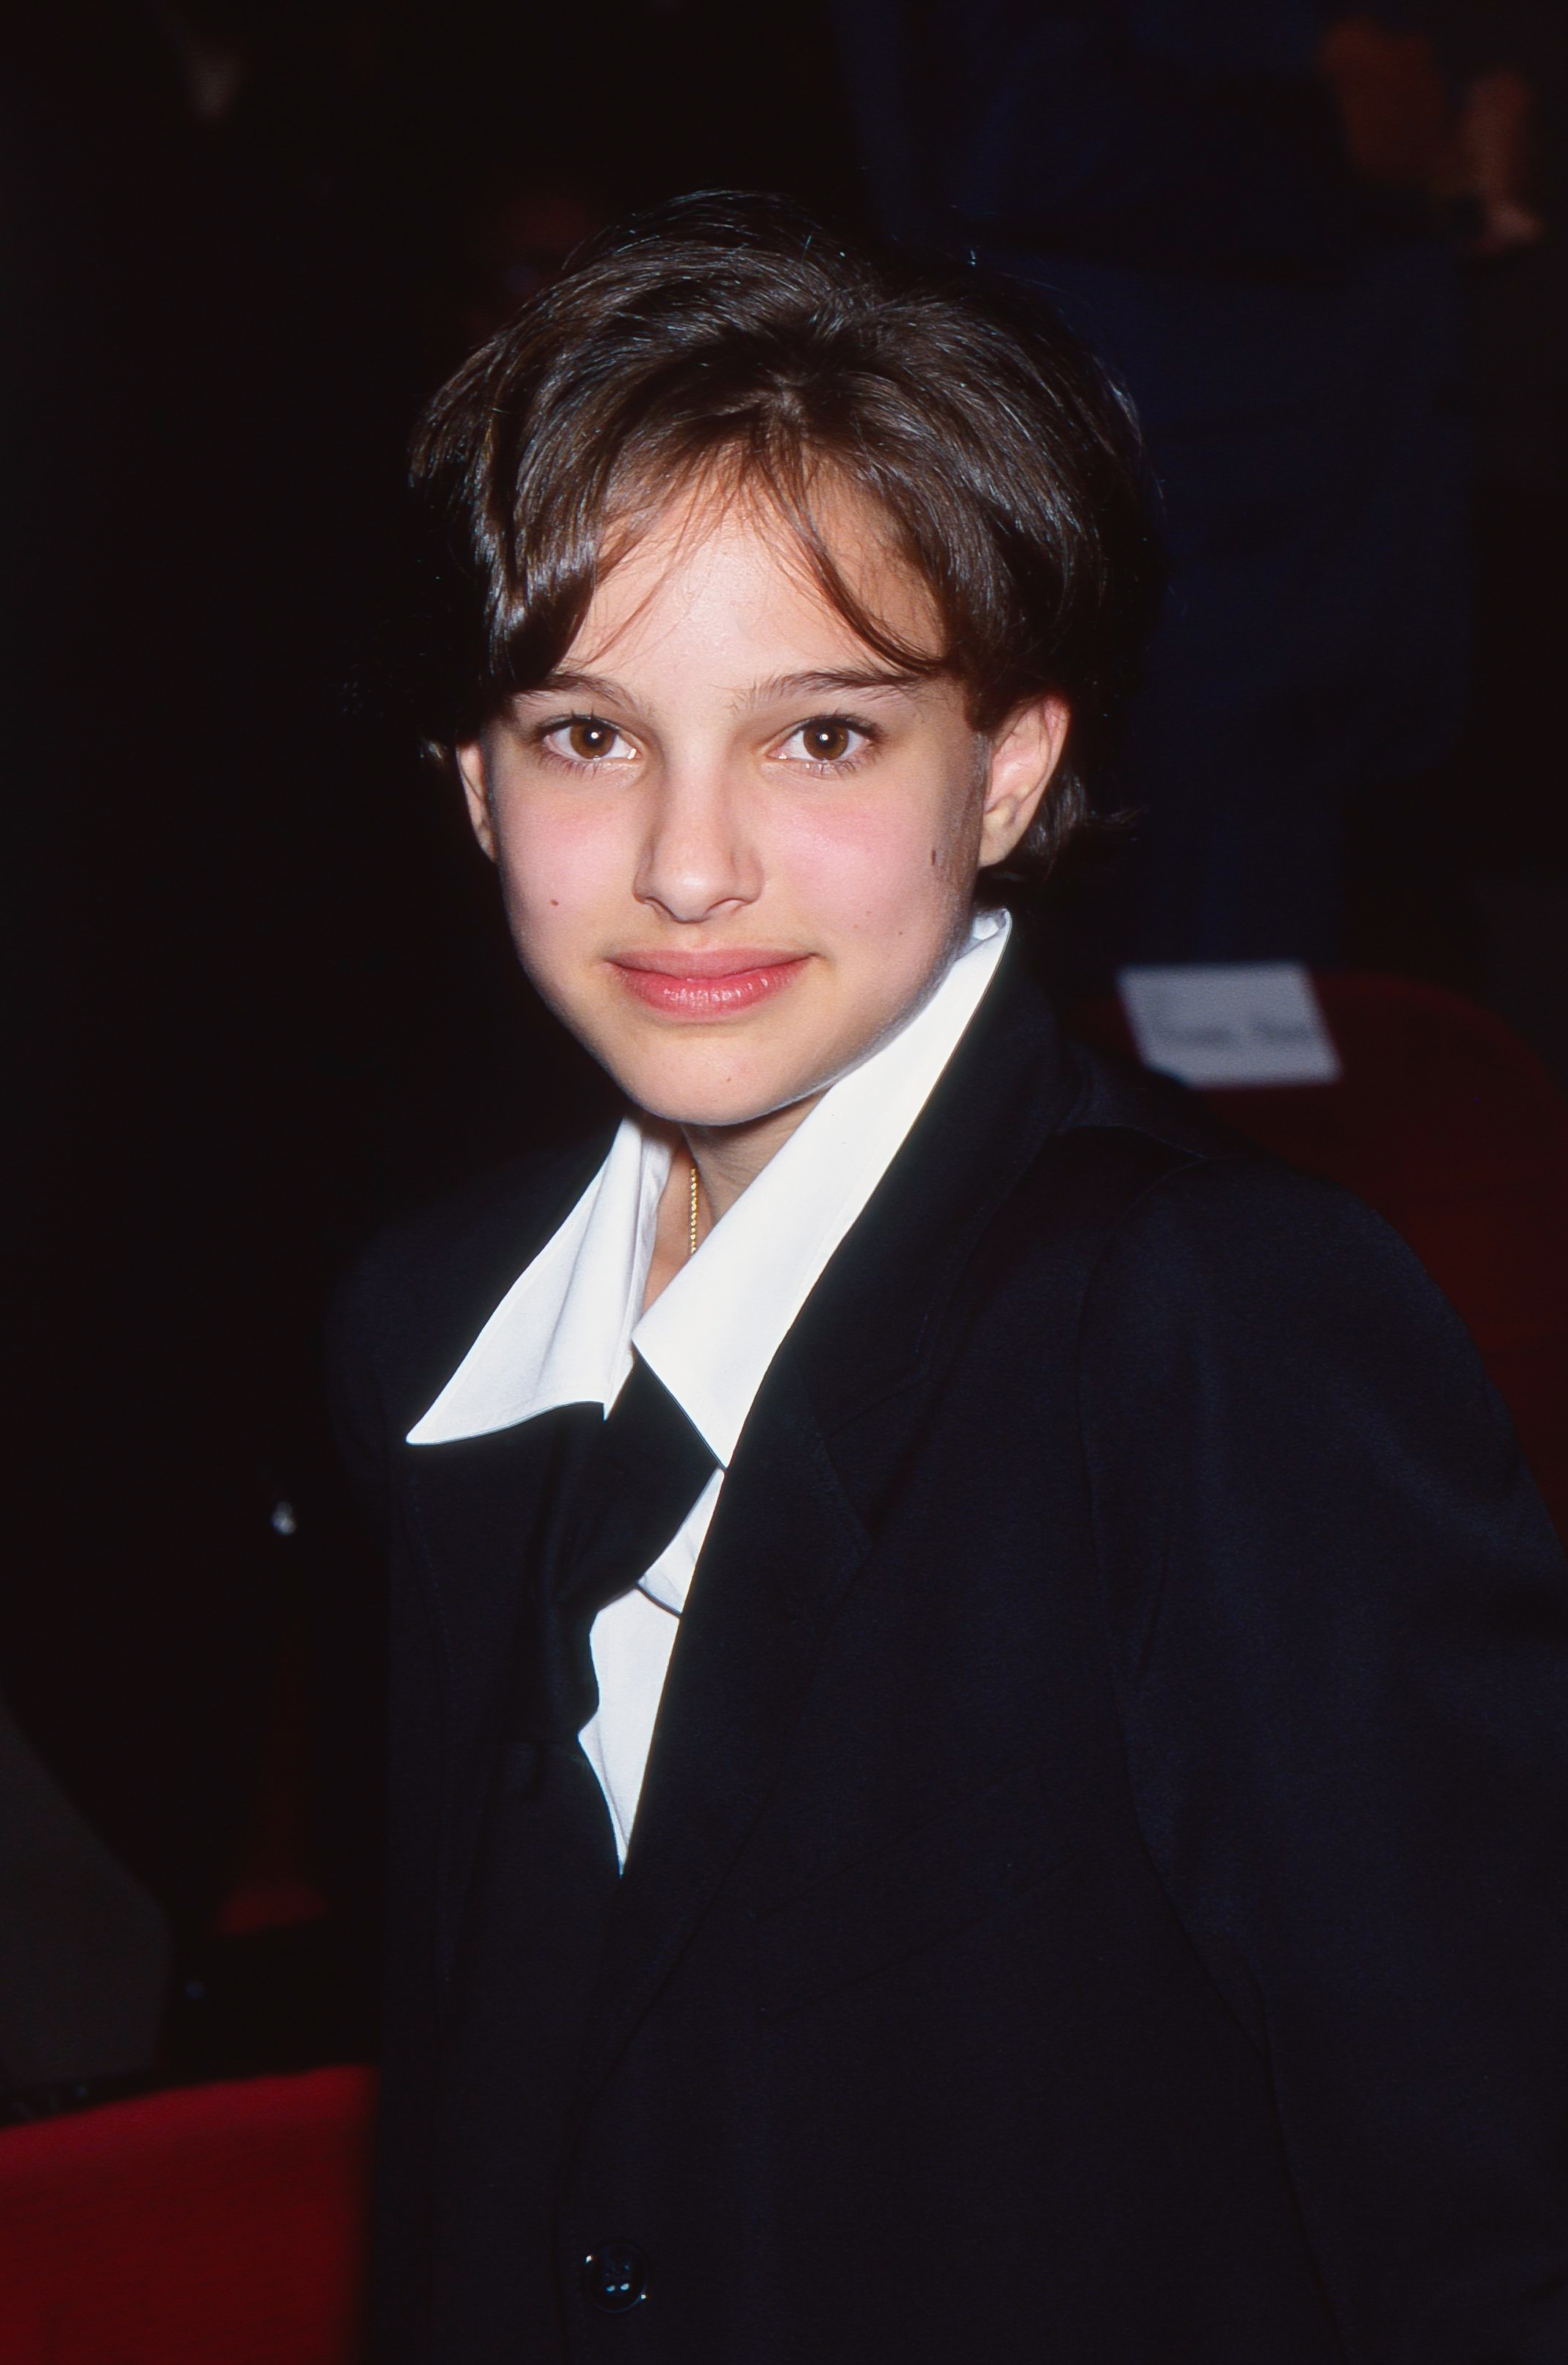 Natalie Portman on a red carpet as a young girl